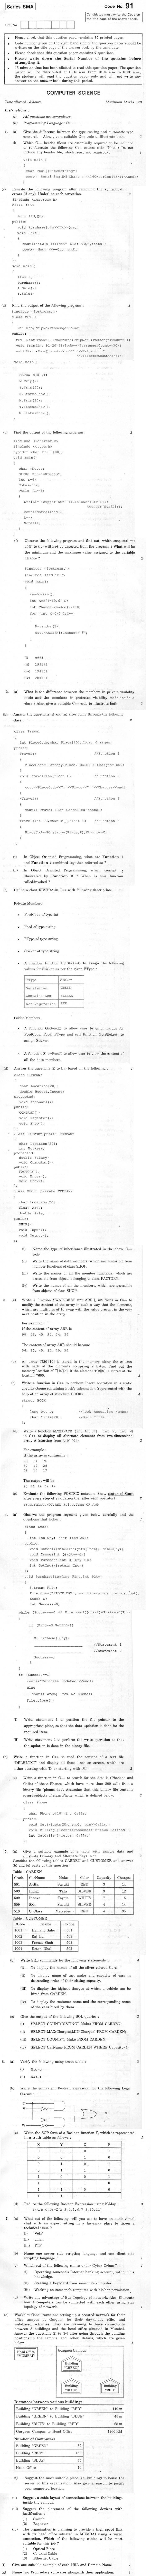 CBSE Class XII Previous Year Question Paper 2012 Computer Science